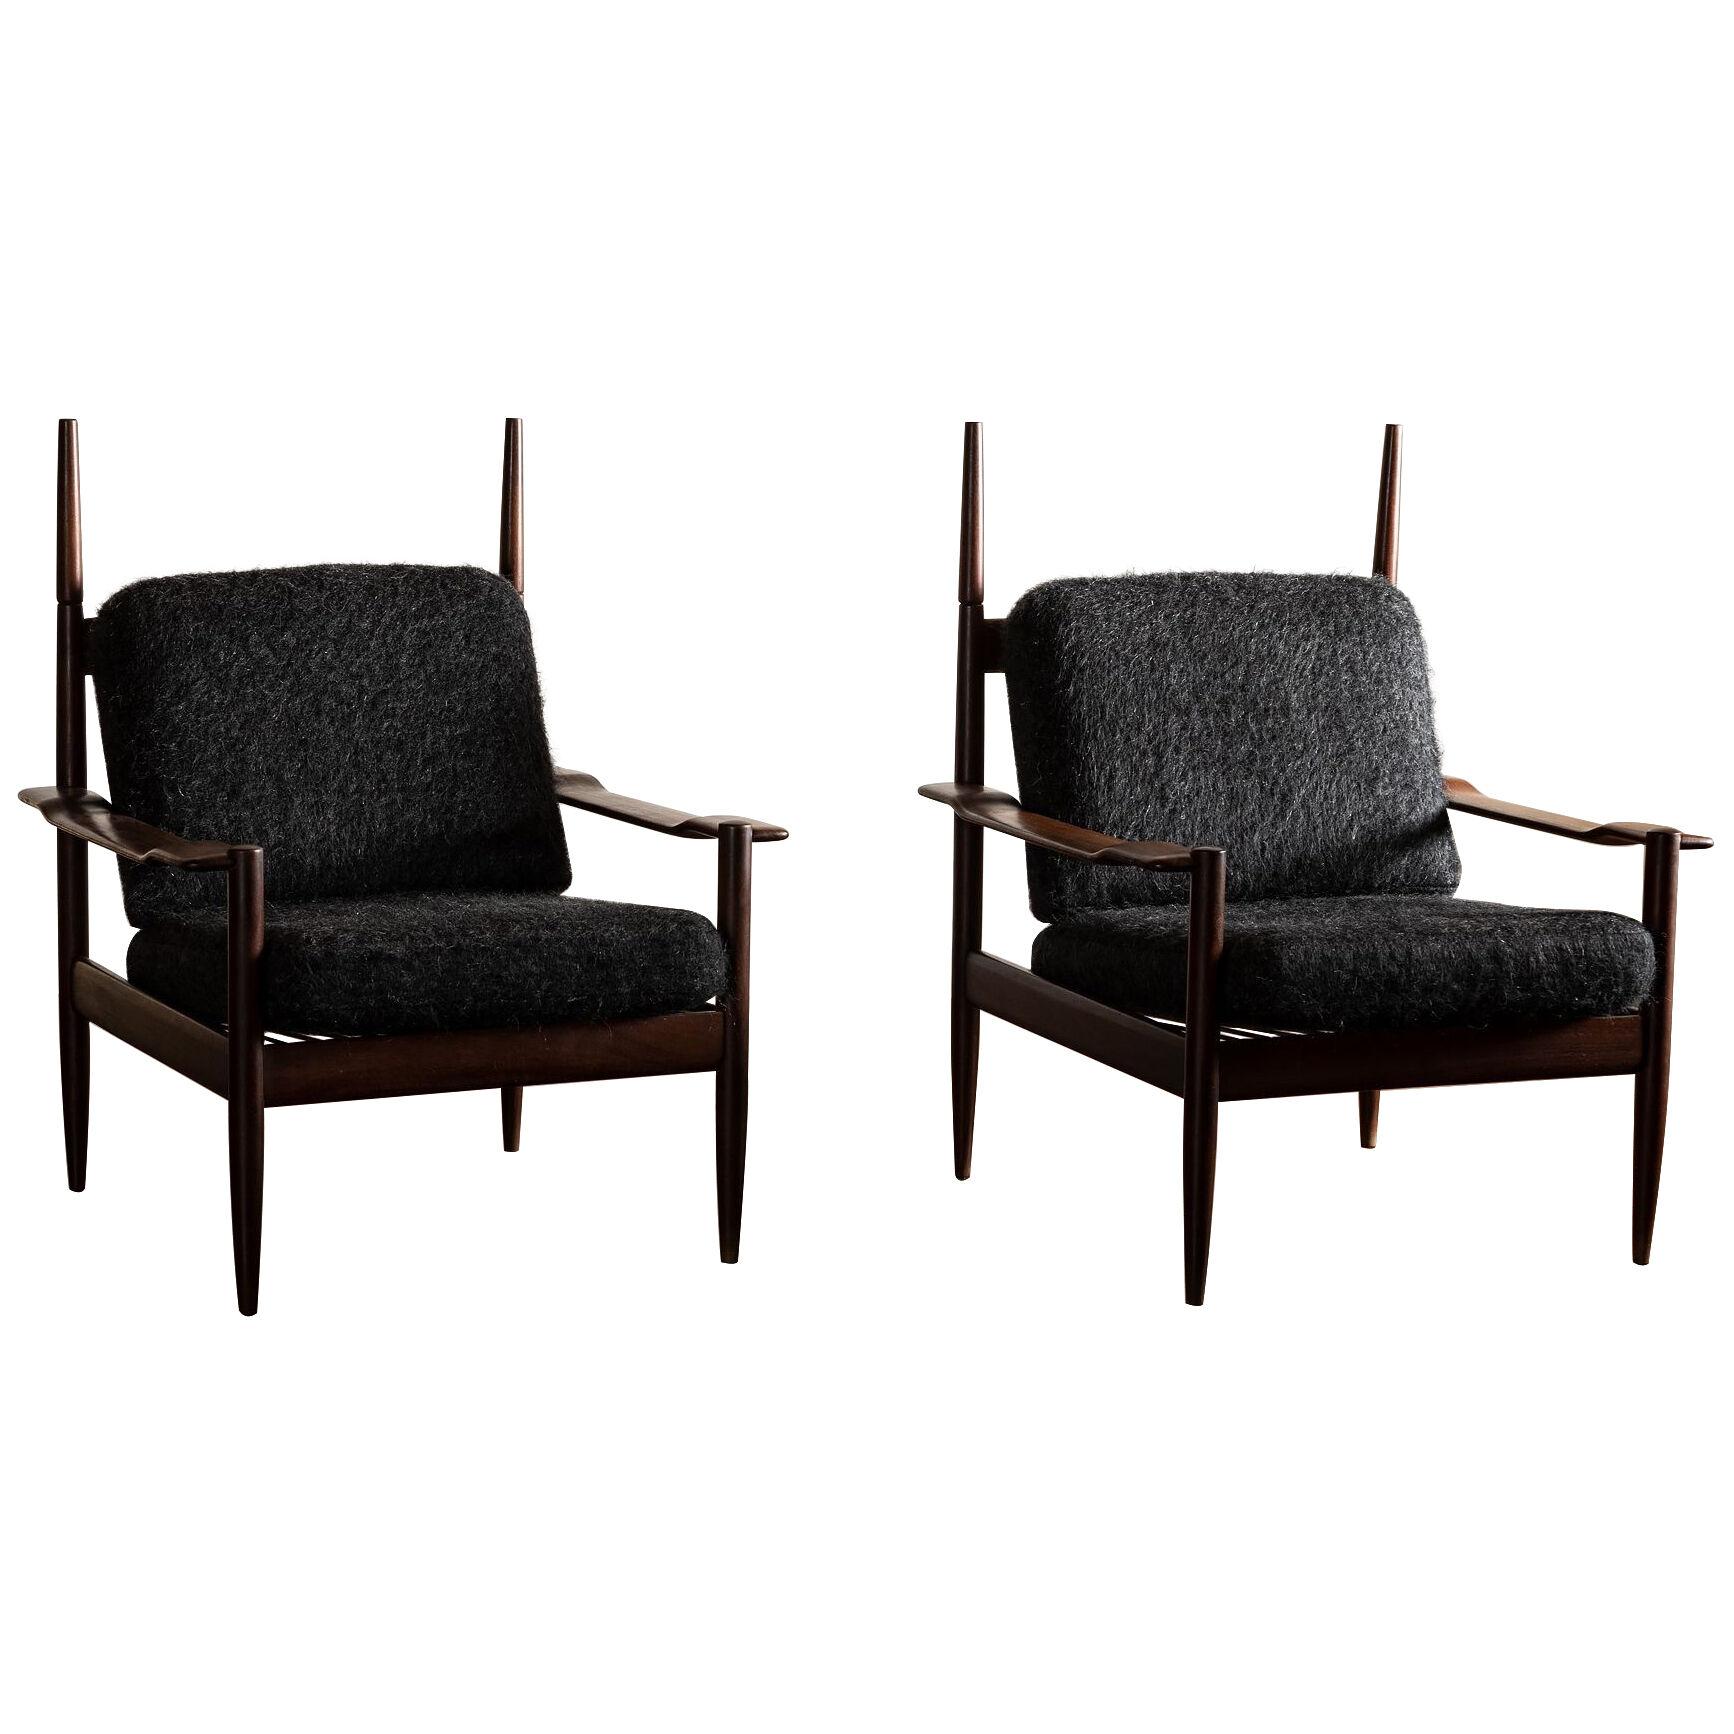 Lovely Pair of Brazilian Chairs in Teak and Pierre Frey Yeti, 1960s